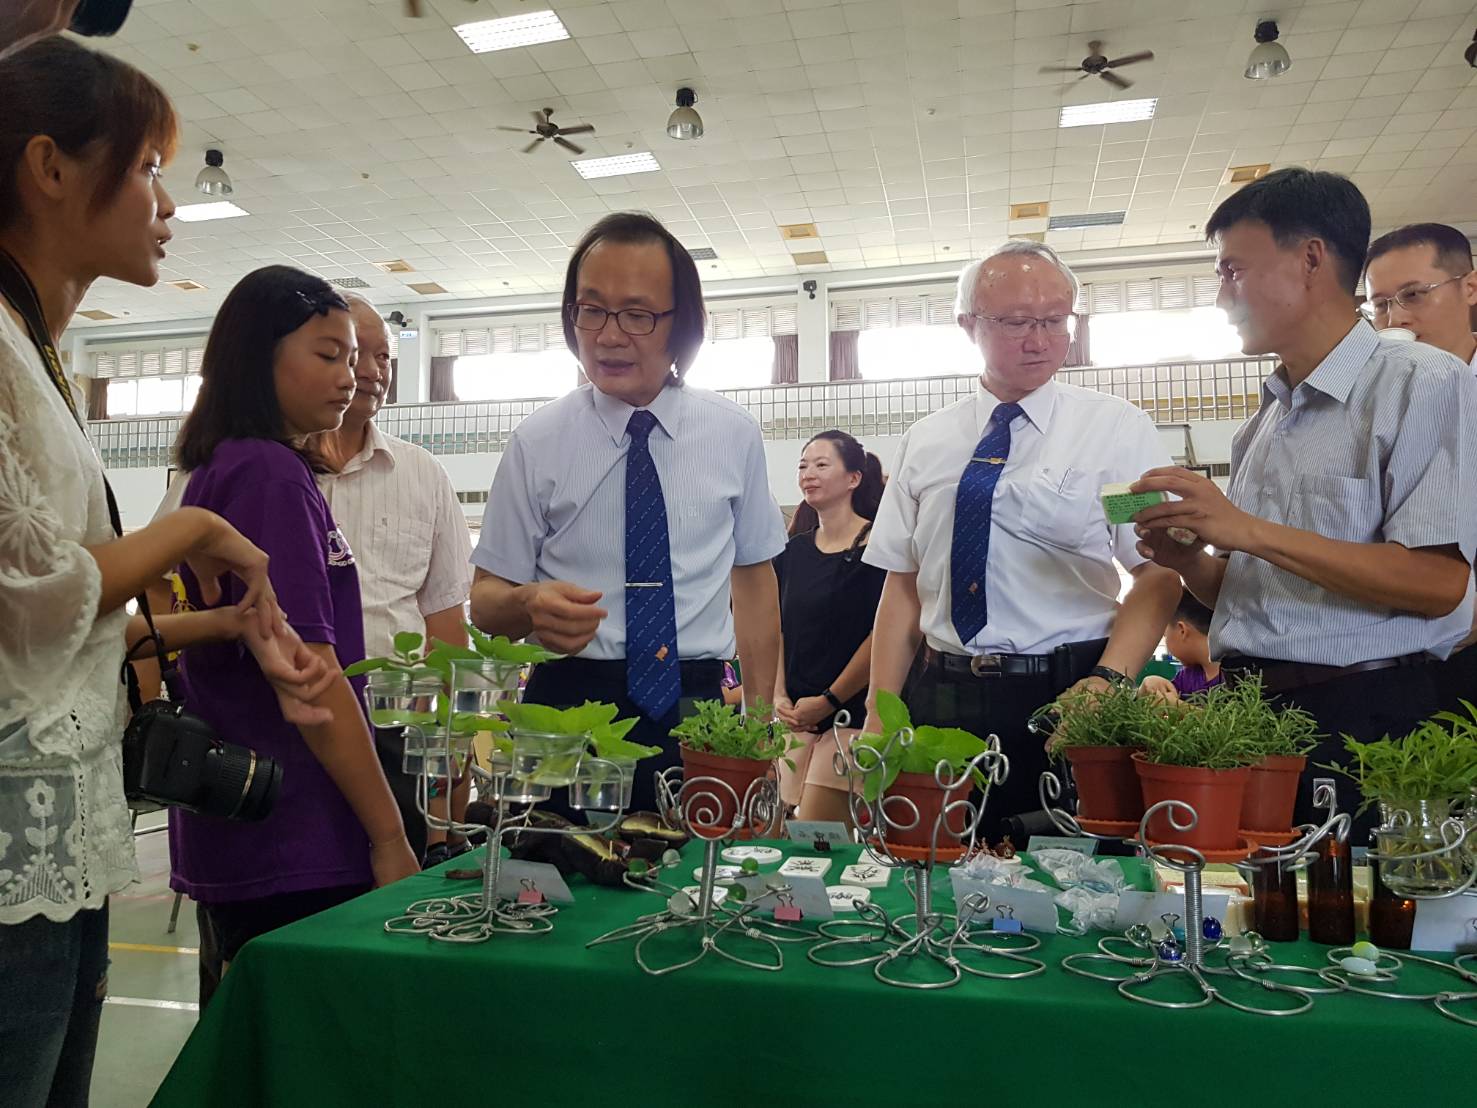  Teachers of Tung-Shih Elementary School explained on the herb planting and application results.